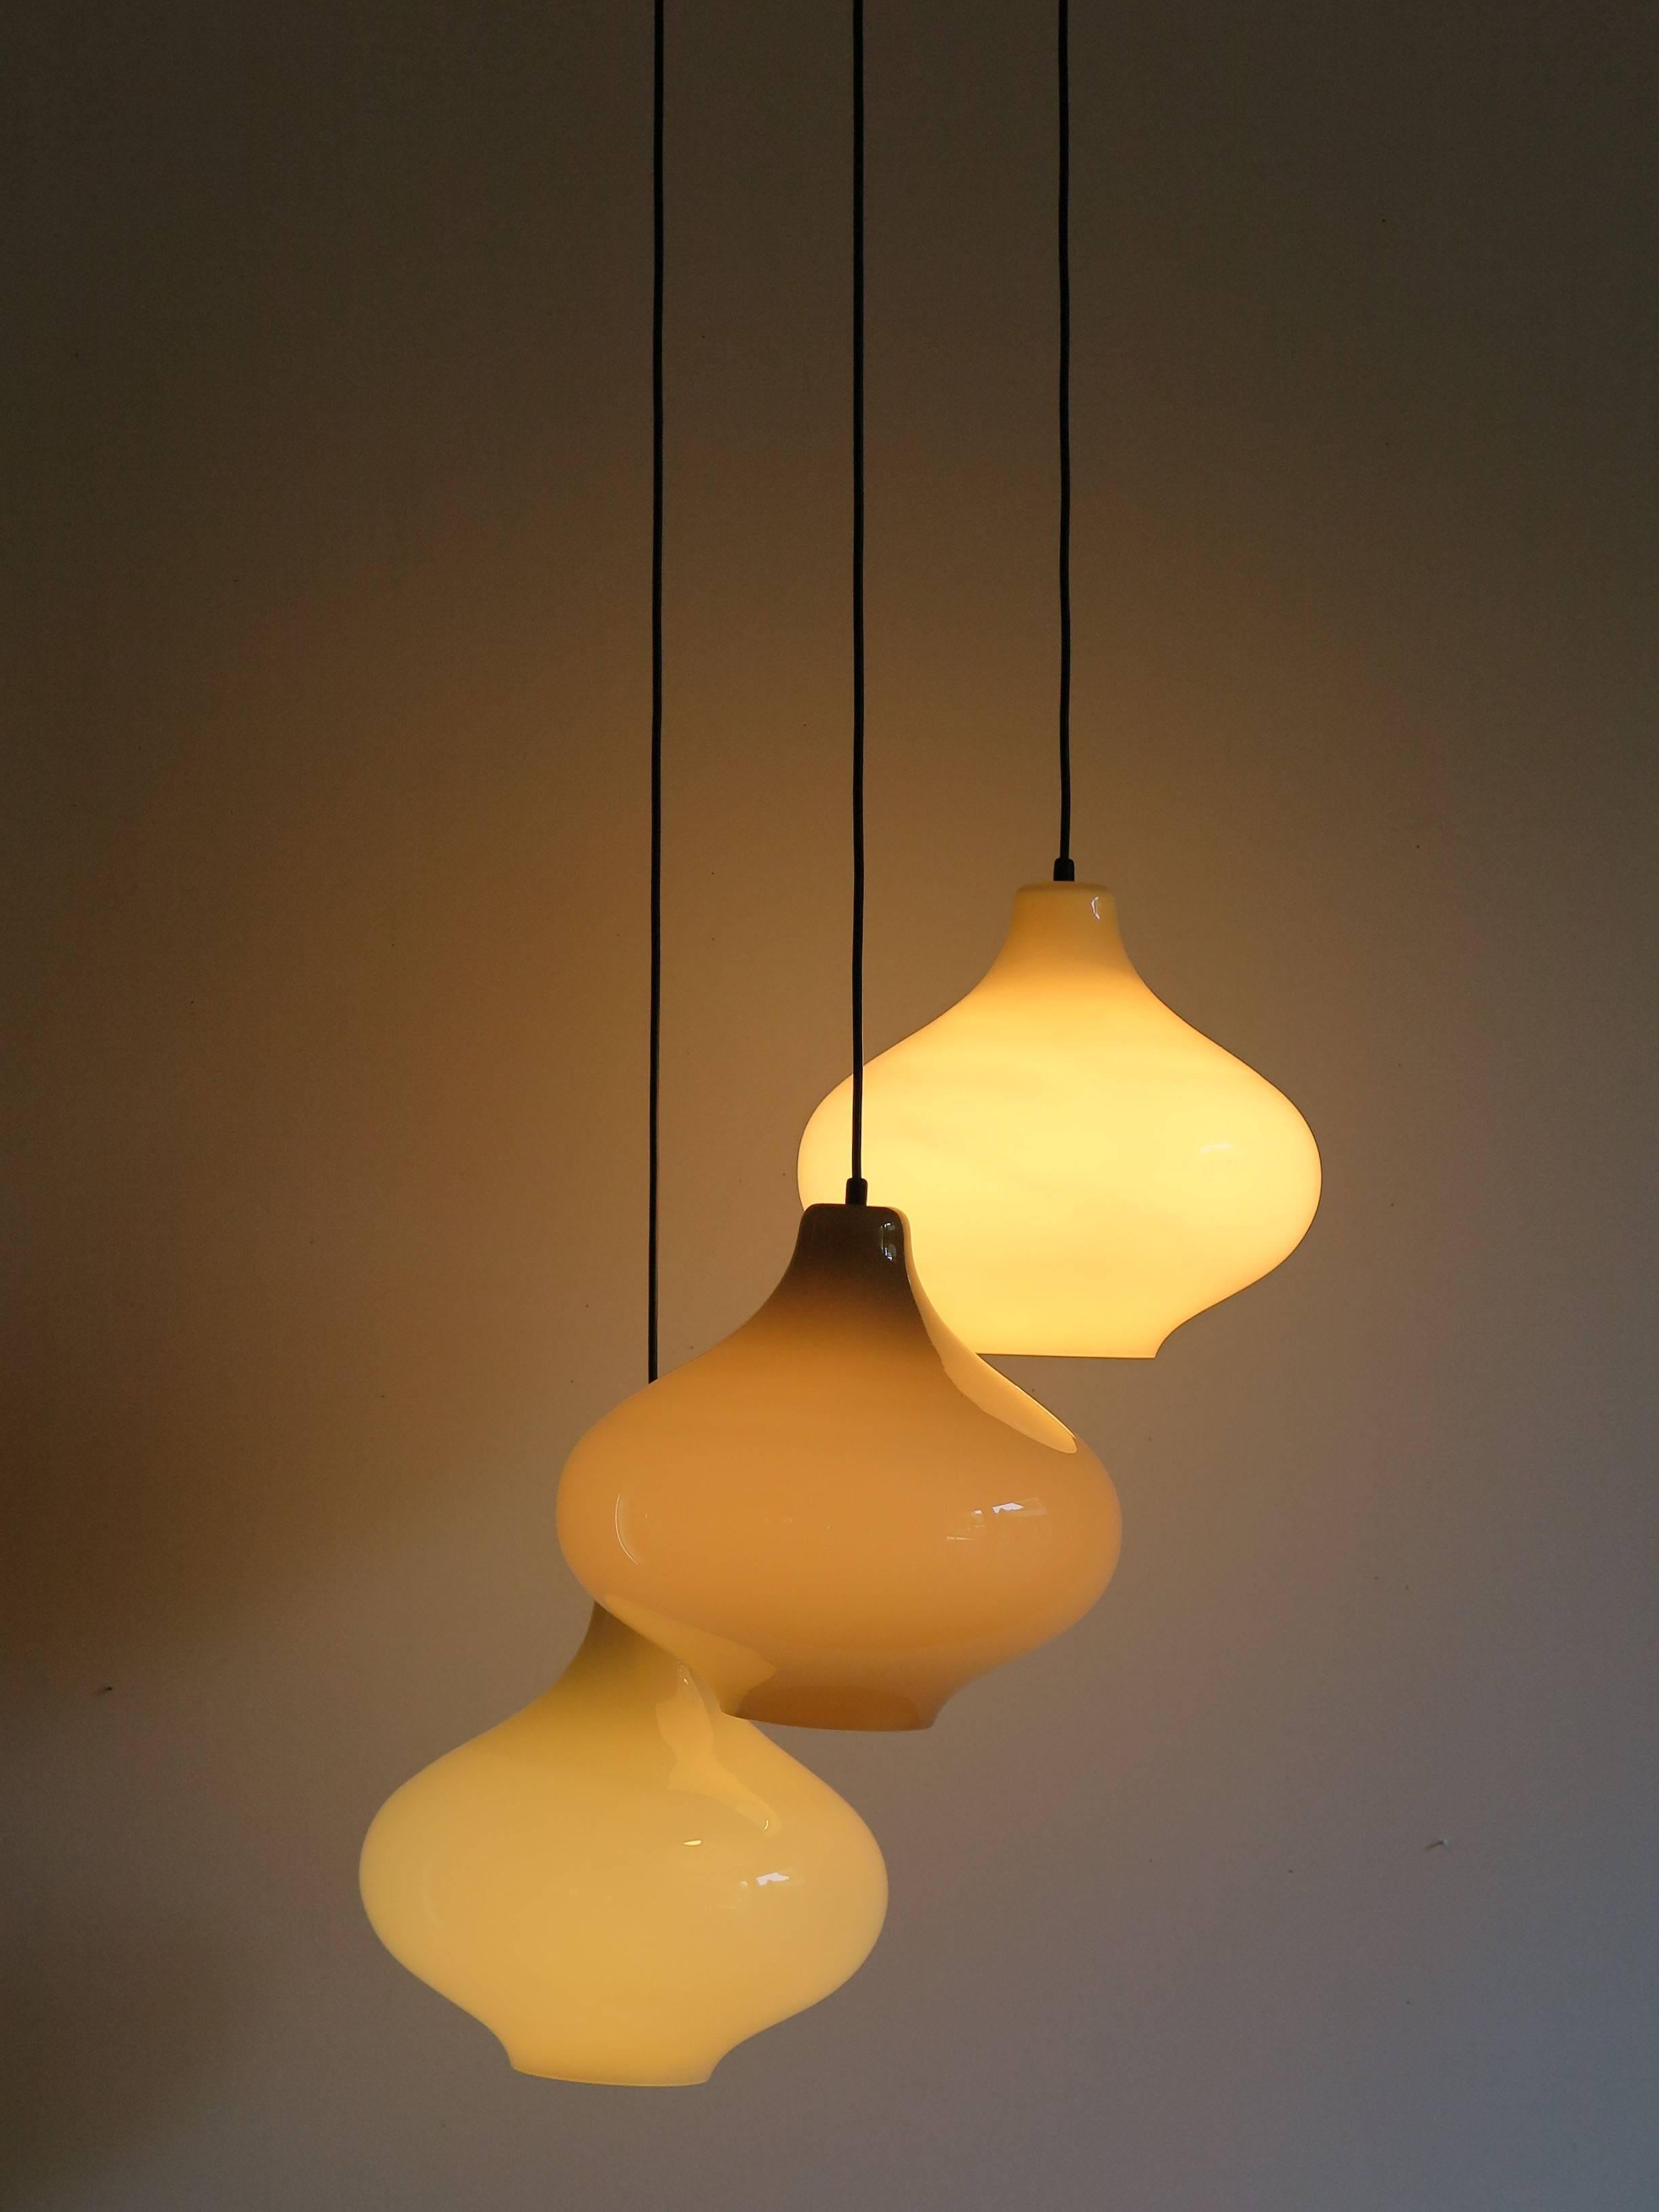 1960s pendant lamp composed by three lights “onion-shape” diffusers made by opalescent glass, dove-gray color, designed by Massimo Vignelli, corresponding to the Venini’s design n°4039.
Cylindrical brass ceiling elements designed by Lino